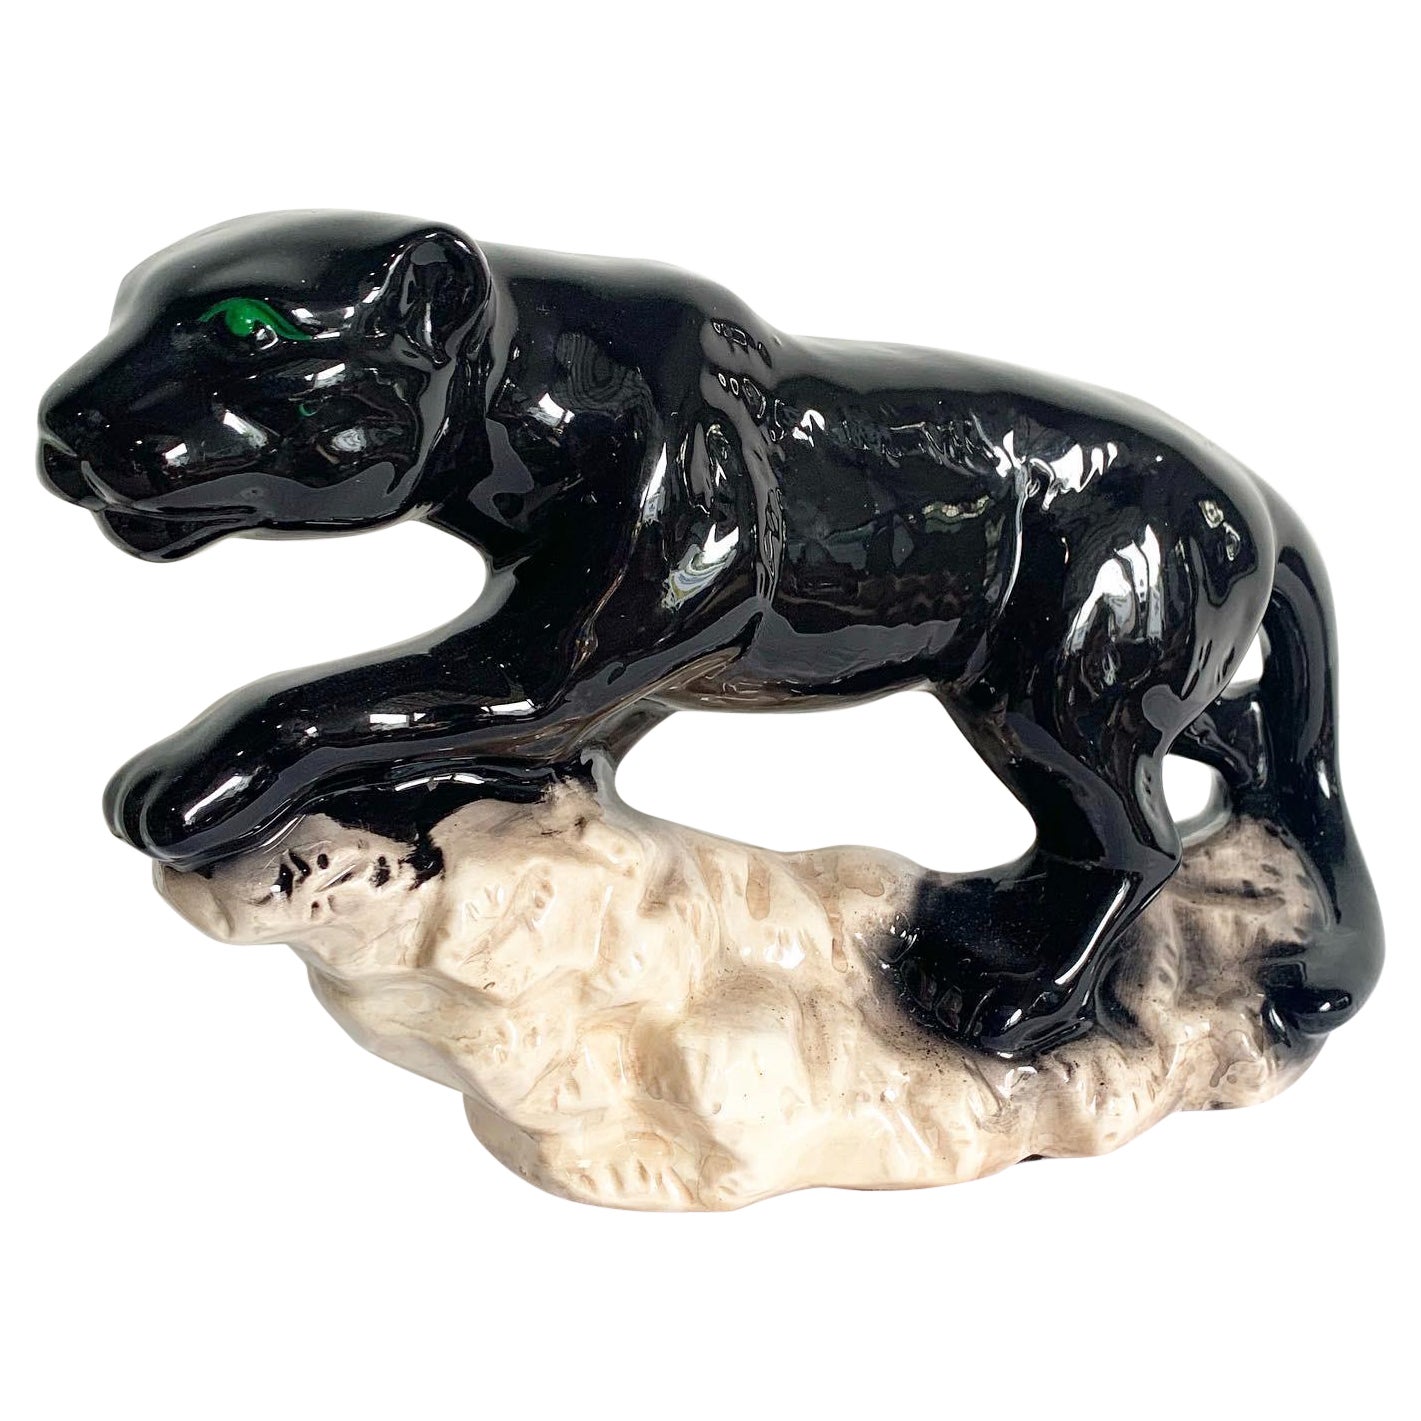 Postmodern Black Gloss Ceramic Panther Sculpture For Sale